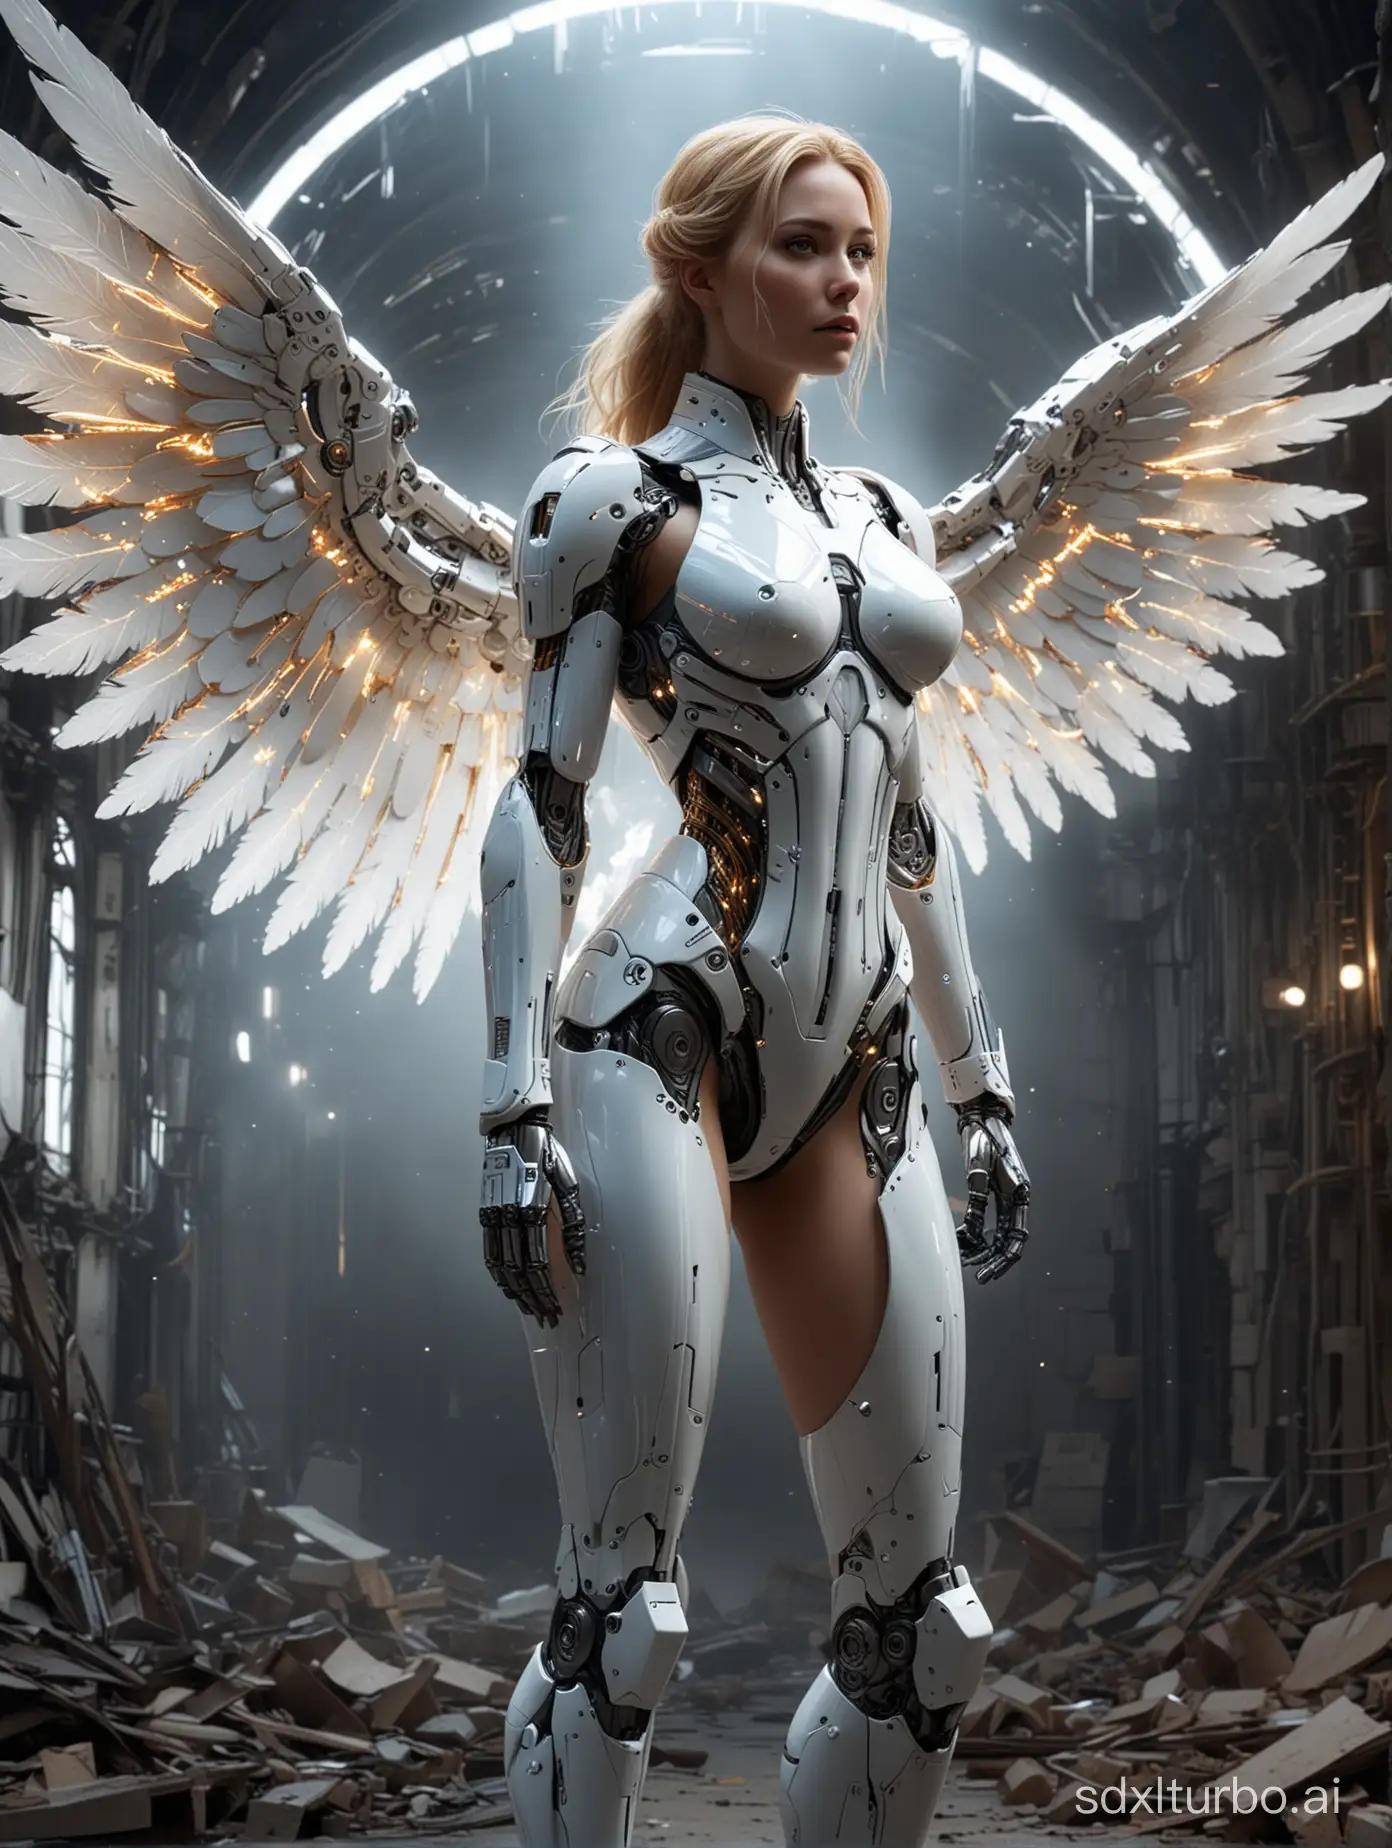 In this ultra-highly detailed 8K CG wallpaper, a female cybernetic angel stands tall amidst a landscape of ruins, gracefully poised in mid-air as she gazes downward upon her audience. The composition is bathed in a bright white theme, evoking an atmosphere of purity and celestial sanctity.
This celestial being features a fully mechanized construct, intricately designed to the most complex degree, with pristine white skin and matching mechanical wings that radiate luminescence. Captured in a cowboy shot perspective, viewers gaze upward to admire her elongated, elegantly posed legs.
An ethereal, glowing halo hovers above her head, reminiscent of a true heavenly entity. Despite her mechanical nature, she appears strikingly lifelike, complete with realistic breasts and golden locks framing her face as she fixes her gaze directly at the viewer.
Clad in a futuristic, clean, modern, simple yet elegant Mecha Iron White Porcelain Armor, the angel embodies science fiction elements. Her armor boasts intricate mechanical components, dark cybernetic auras around the robot joints, and multi-line lighting that enhances the contours of her form.
Her body is adorned with e-skin embedded with circuitry and features an aperture-like, glowing circular space-time tunnel. A vast window behind her reveals a glimpse into the cosmos, adding depth and grandeur to the scene.
Rendered in meticulous detail using ambient occlusion techniques, the artwork highlights the nuanced shadows and interplay of light across her body. Multi-lights illuminate her form, casting dynamic shadows and emphasizing the holographic projections and glowing text inscribed onto her thighs.
In summary, this masterpiece presents a technologically advanced cyborg angel in a setting that seamlessly integrates religious iconography with cutting-edge sci-fi design, showcasing the pinnacle of artistic quality through its incredibly detailed, super-complex visual narrative.